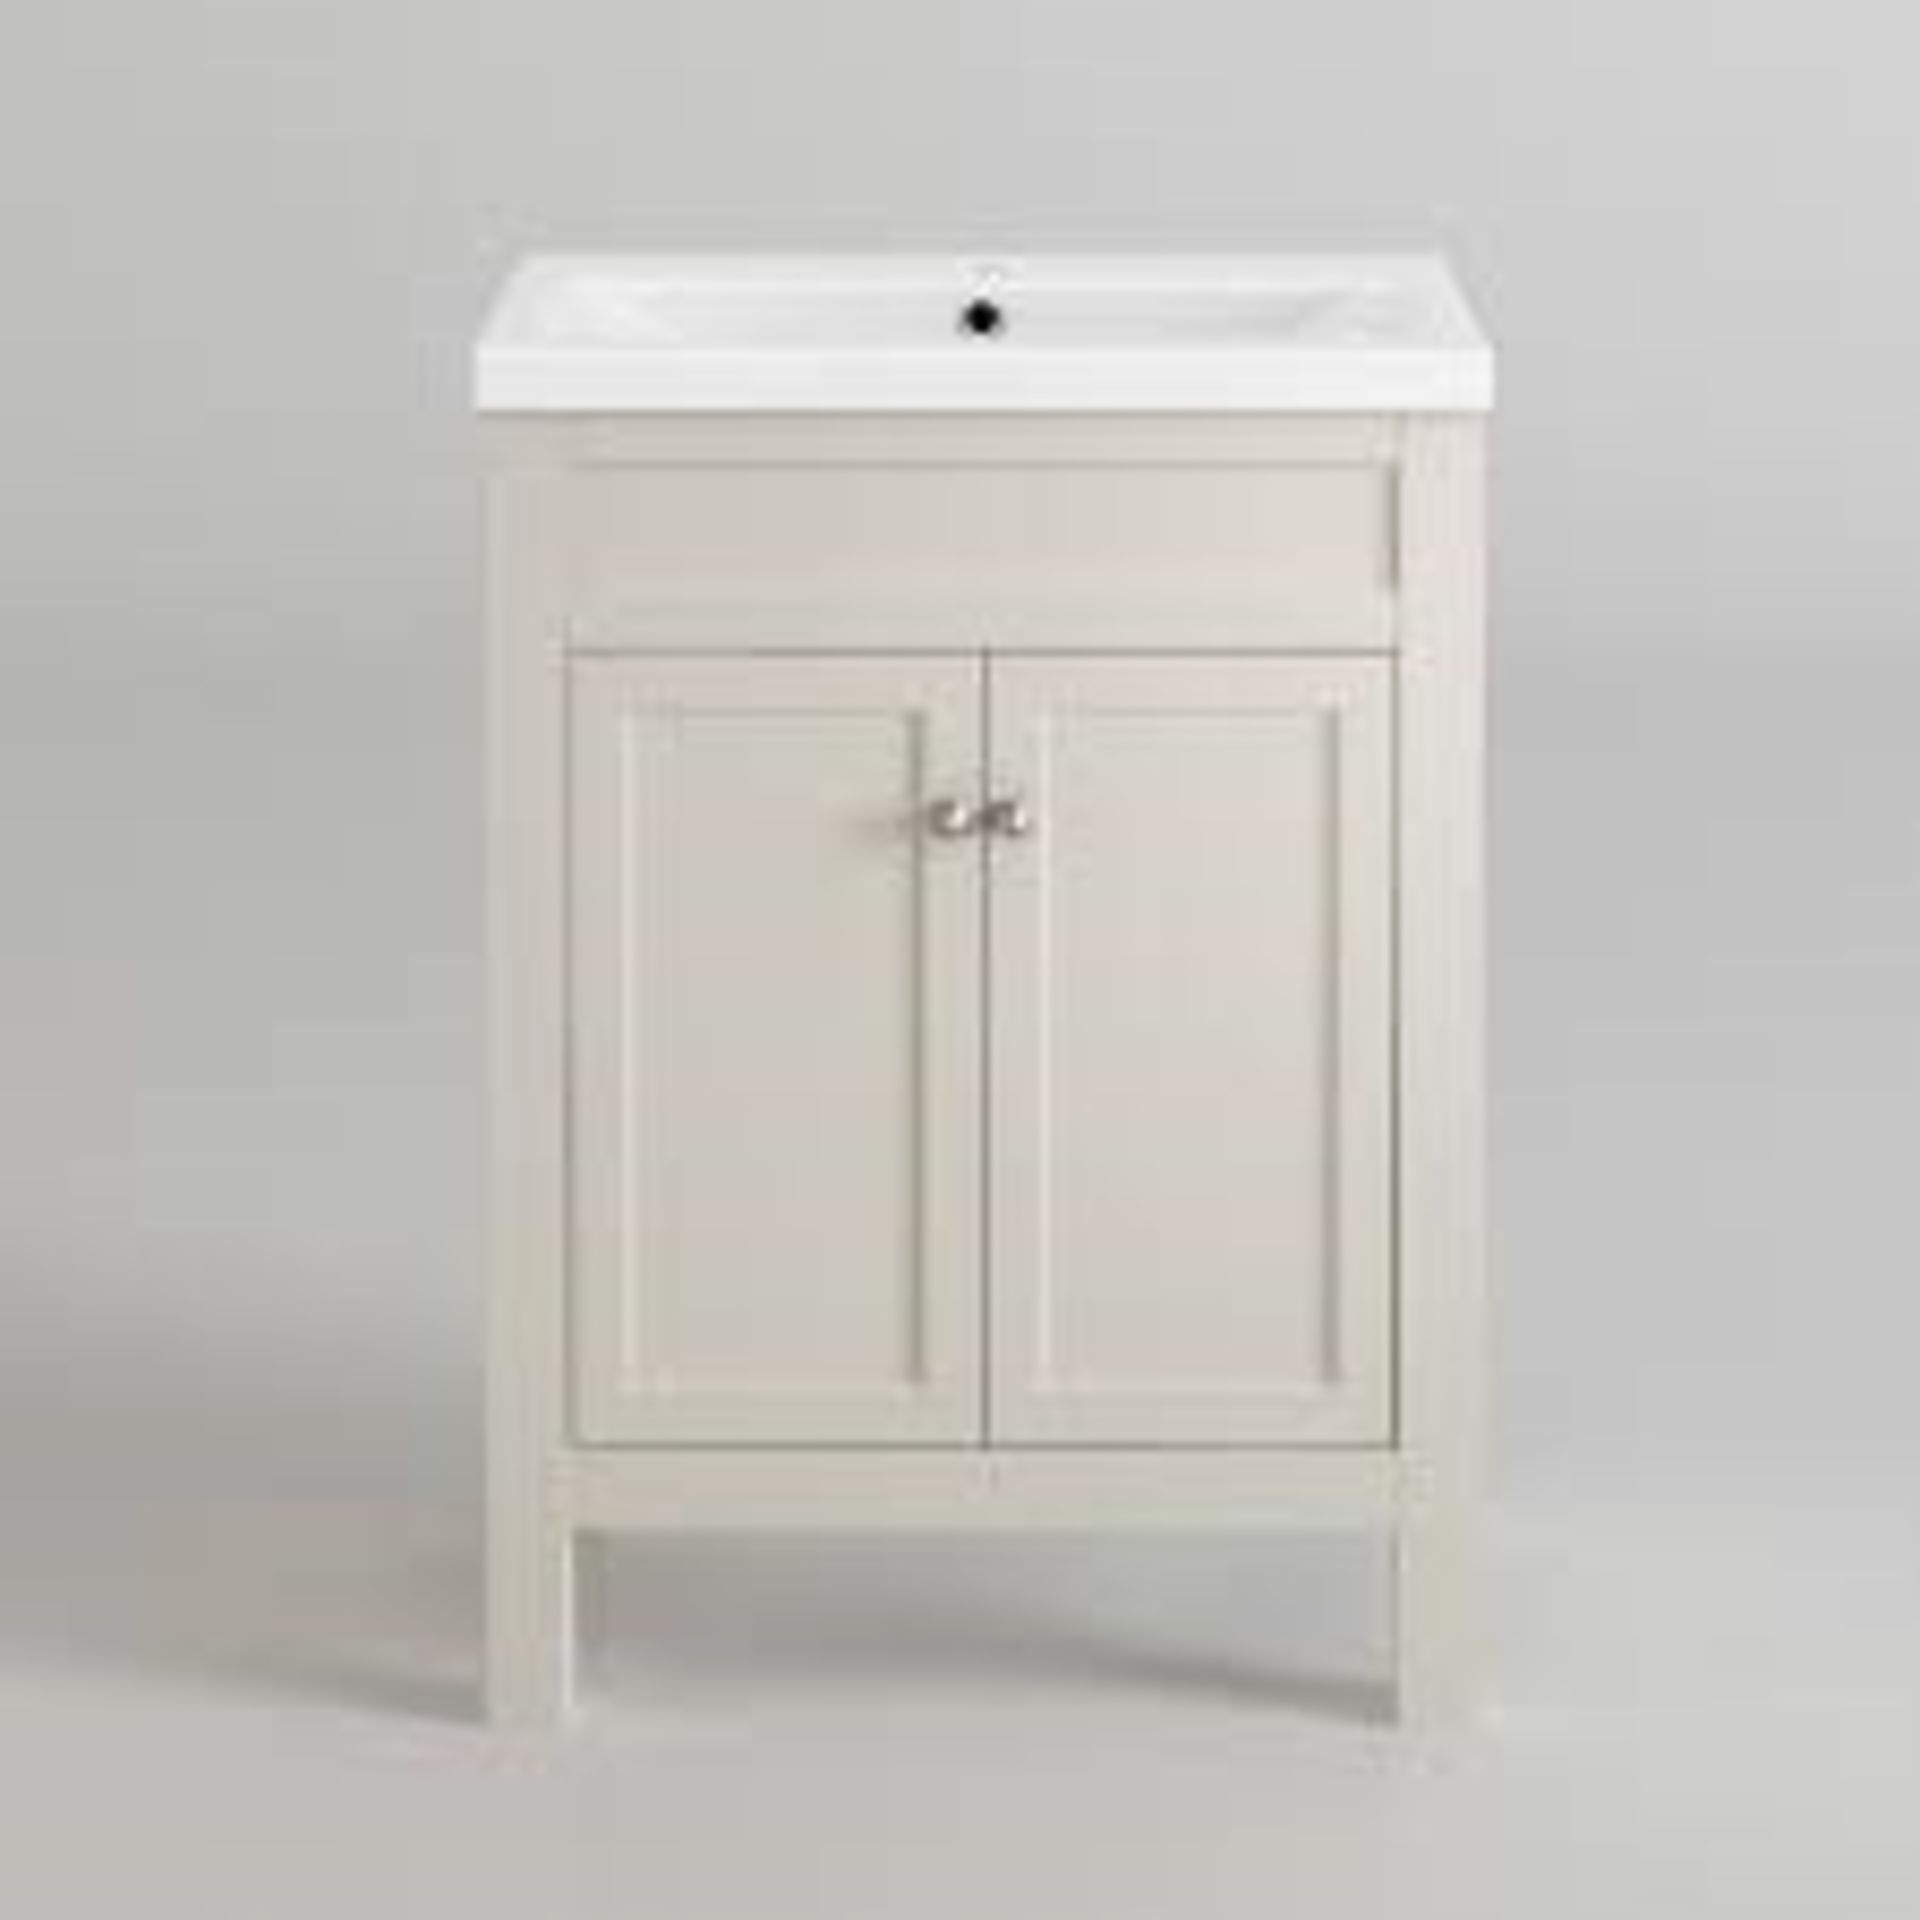 453 | 2 x 600mm Vanity Unit in Ivory RRP of Pallet - £1000 Delivery charged at £50 + VAT per